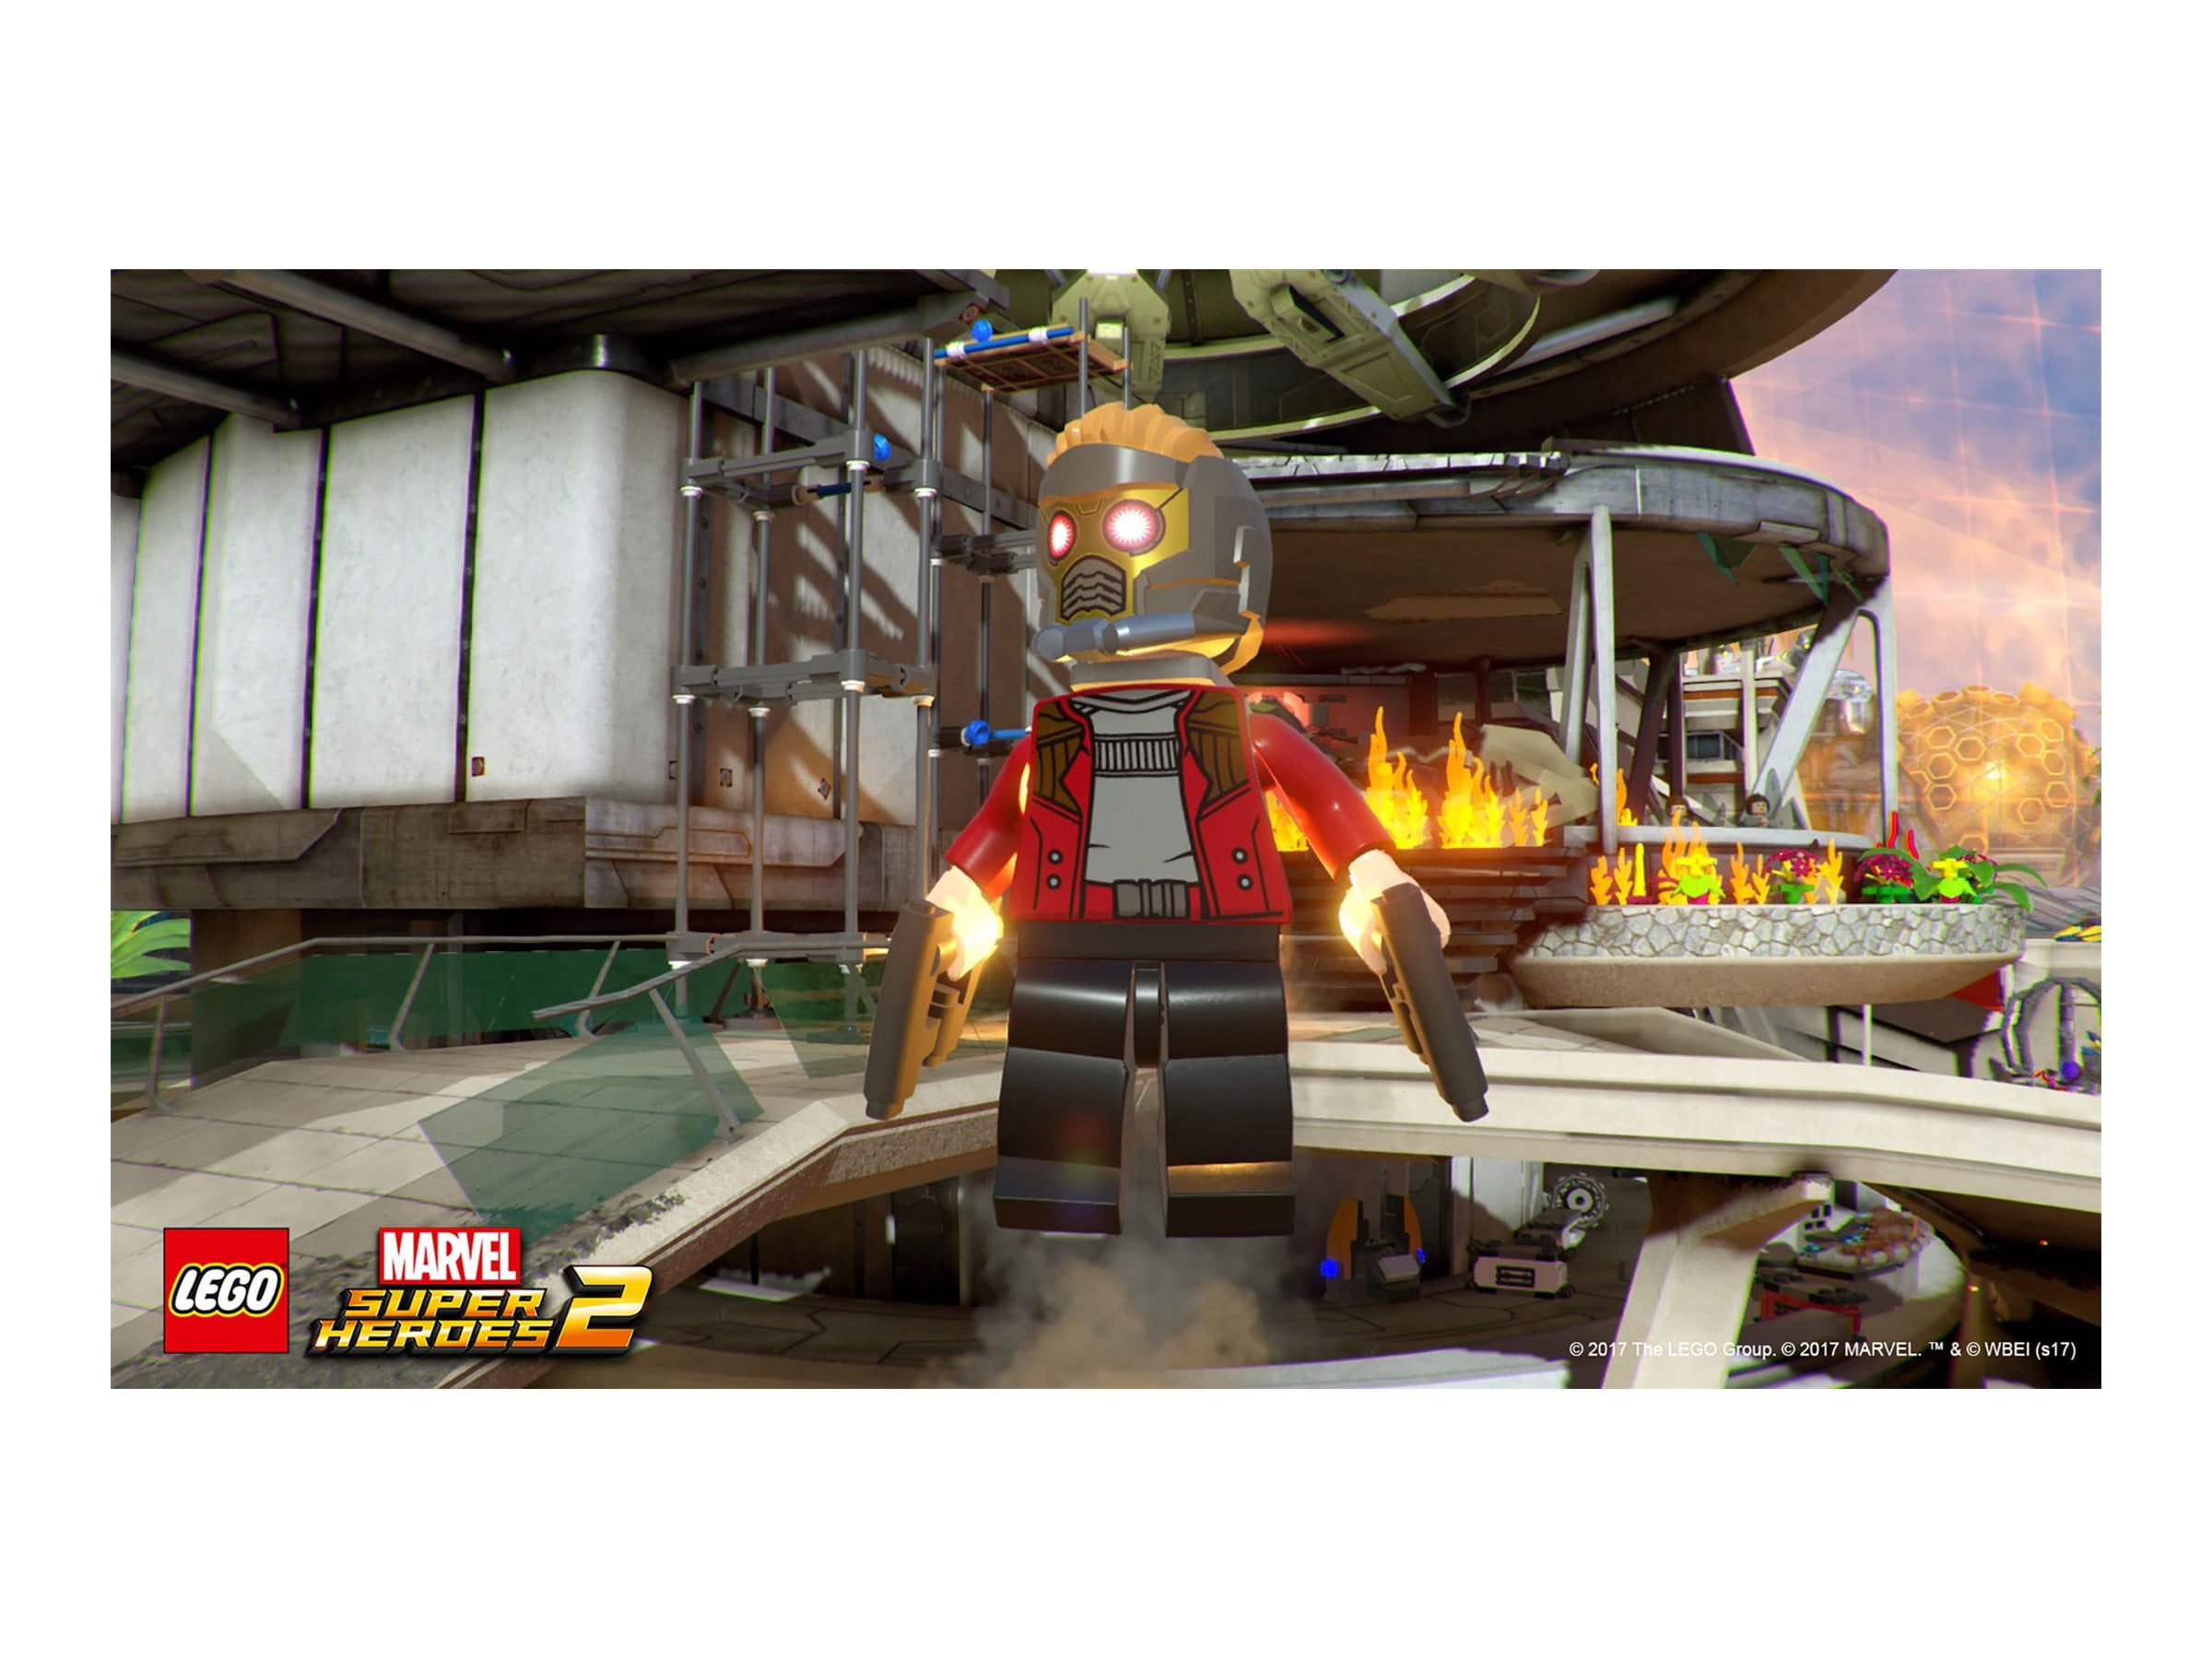 LEGO Marvel Collection Xbox One [Digital Code]